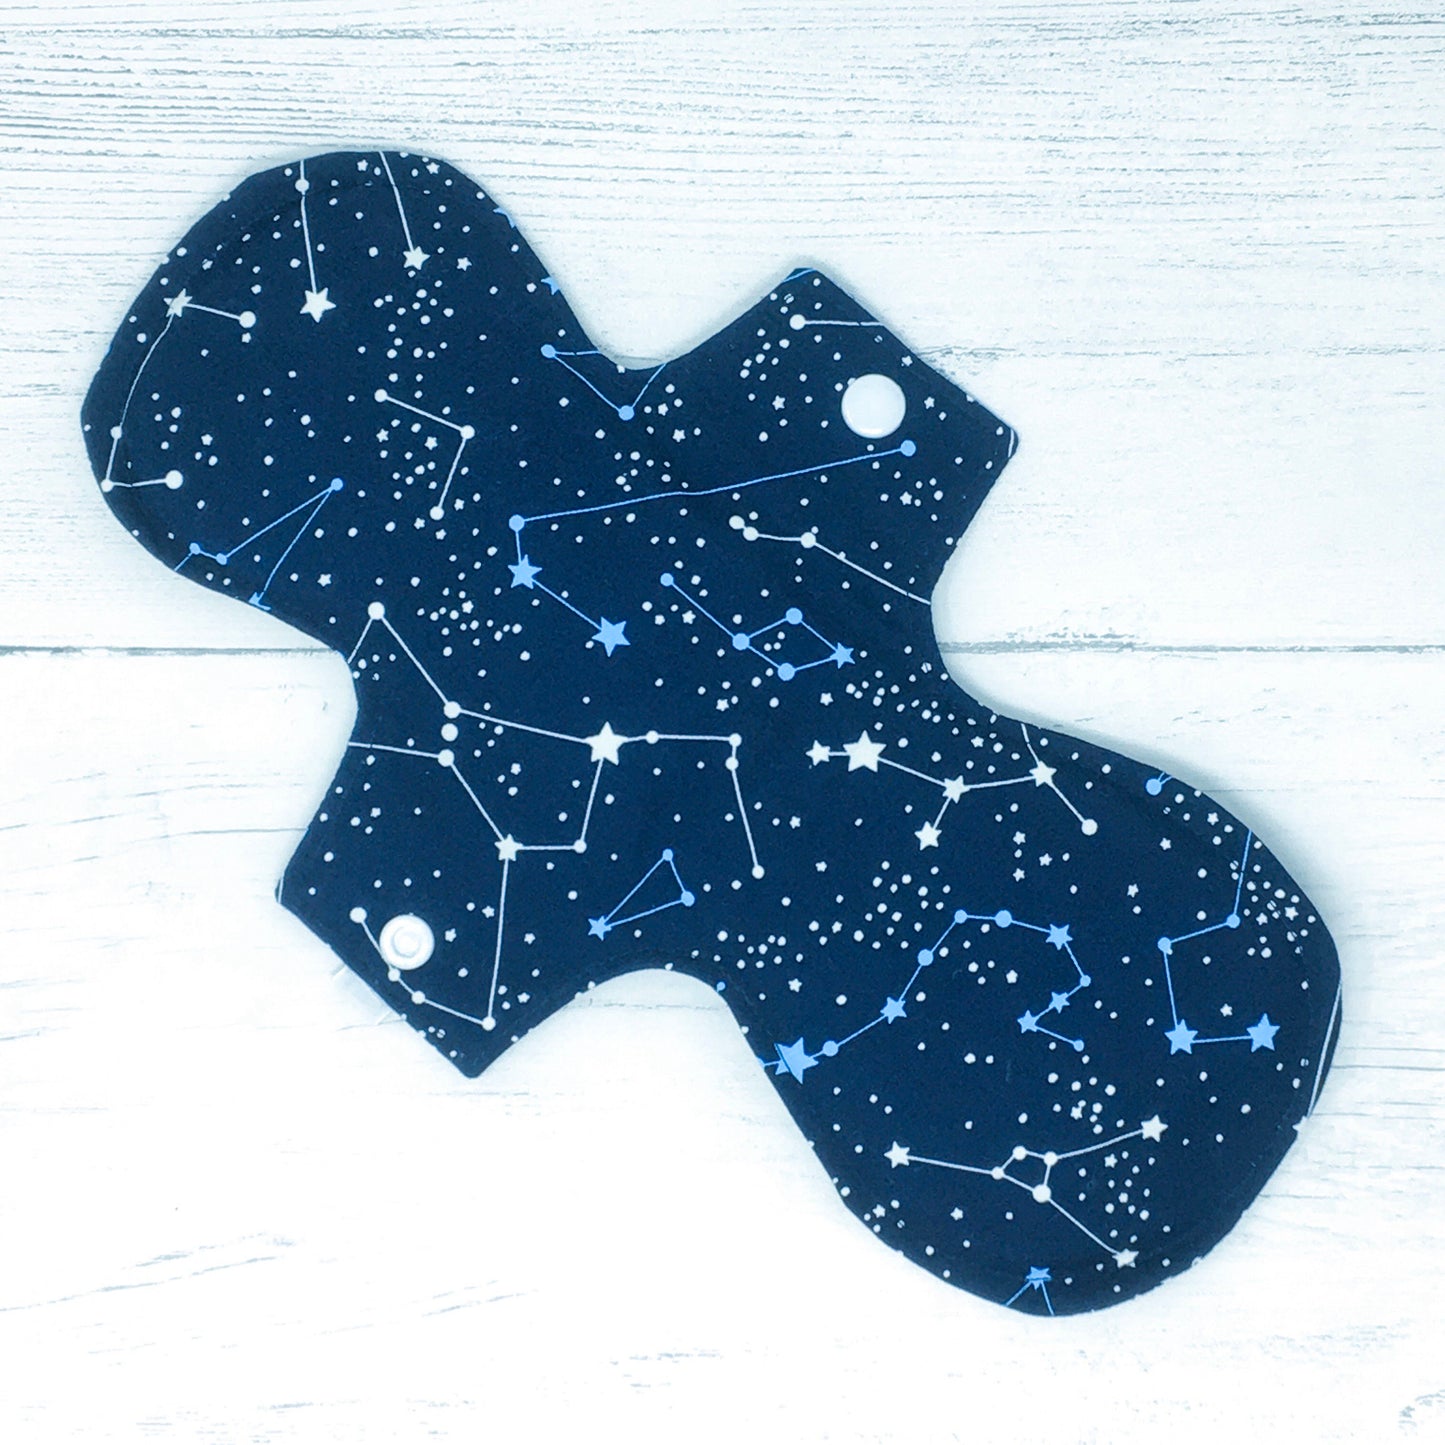 11" Reusable menstrual pad with pattern of constellations on a navy cotton fabric. Reverse side shown